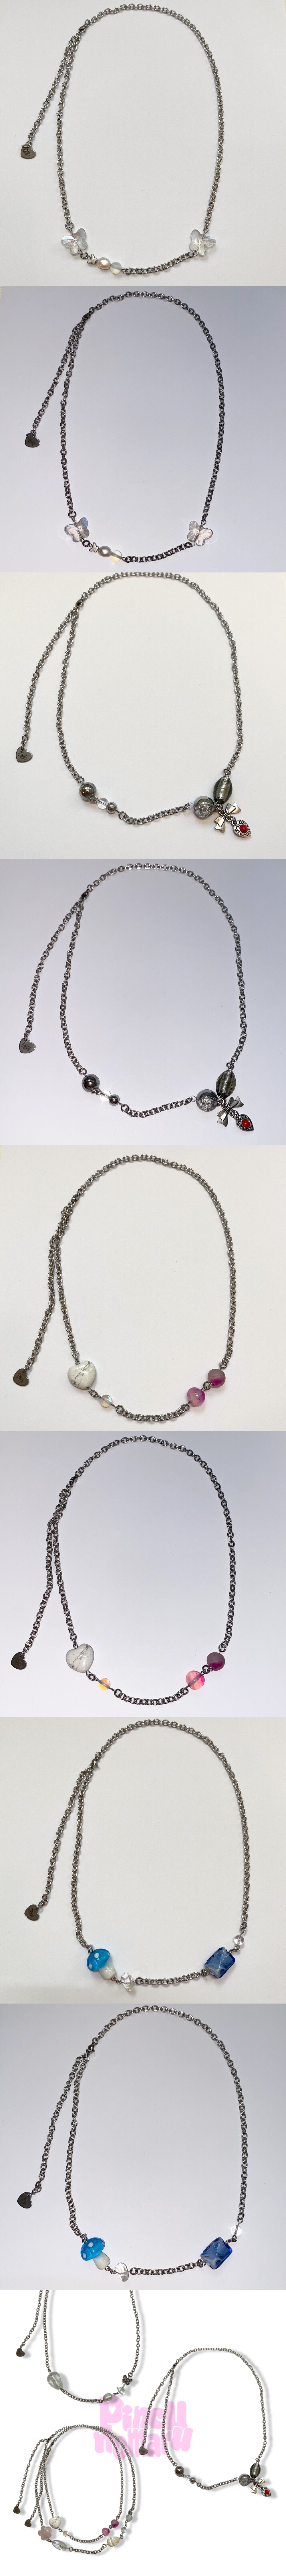 (PINCU special) Chain necklace